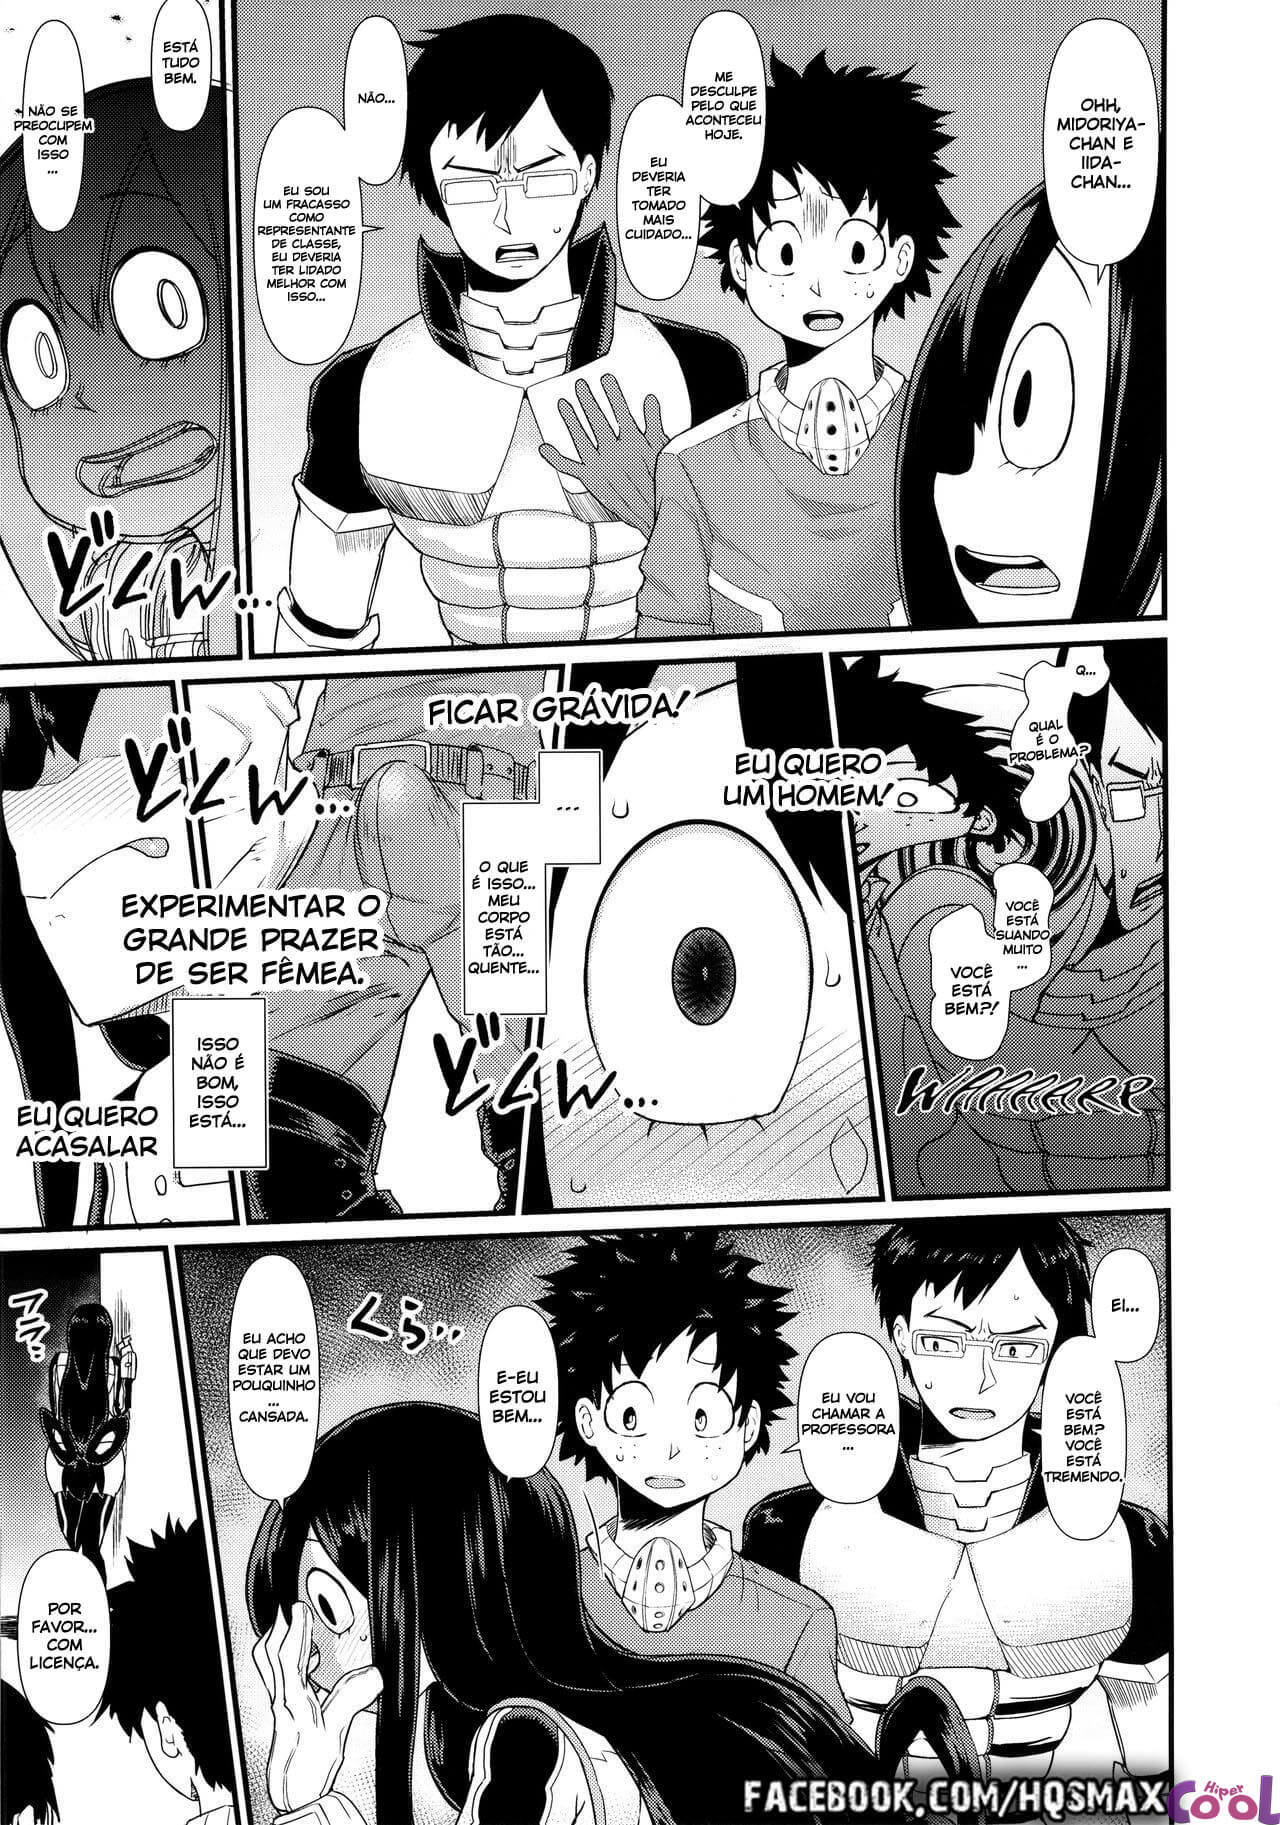 froppy-chapter-01-page-04.jpg